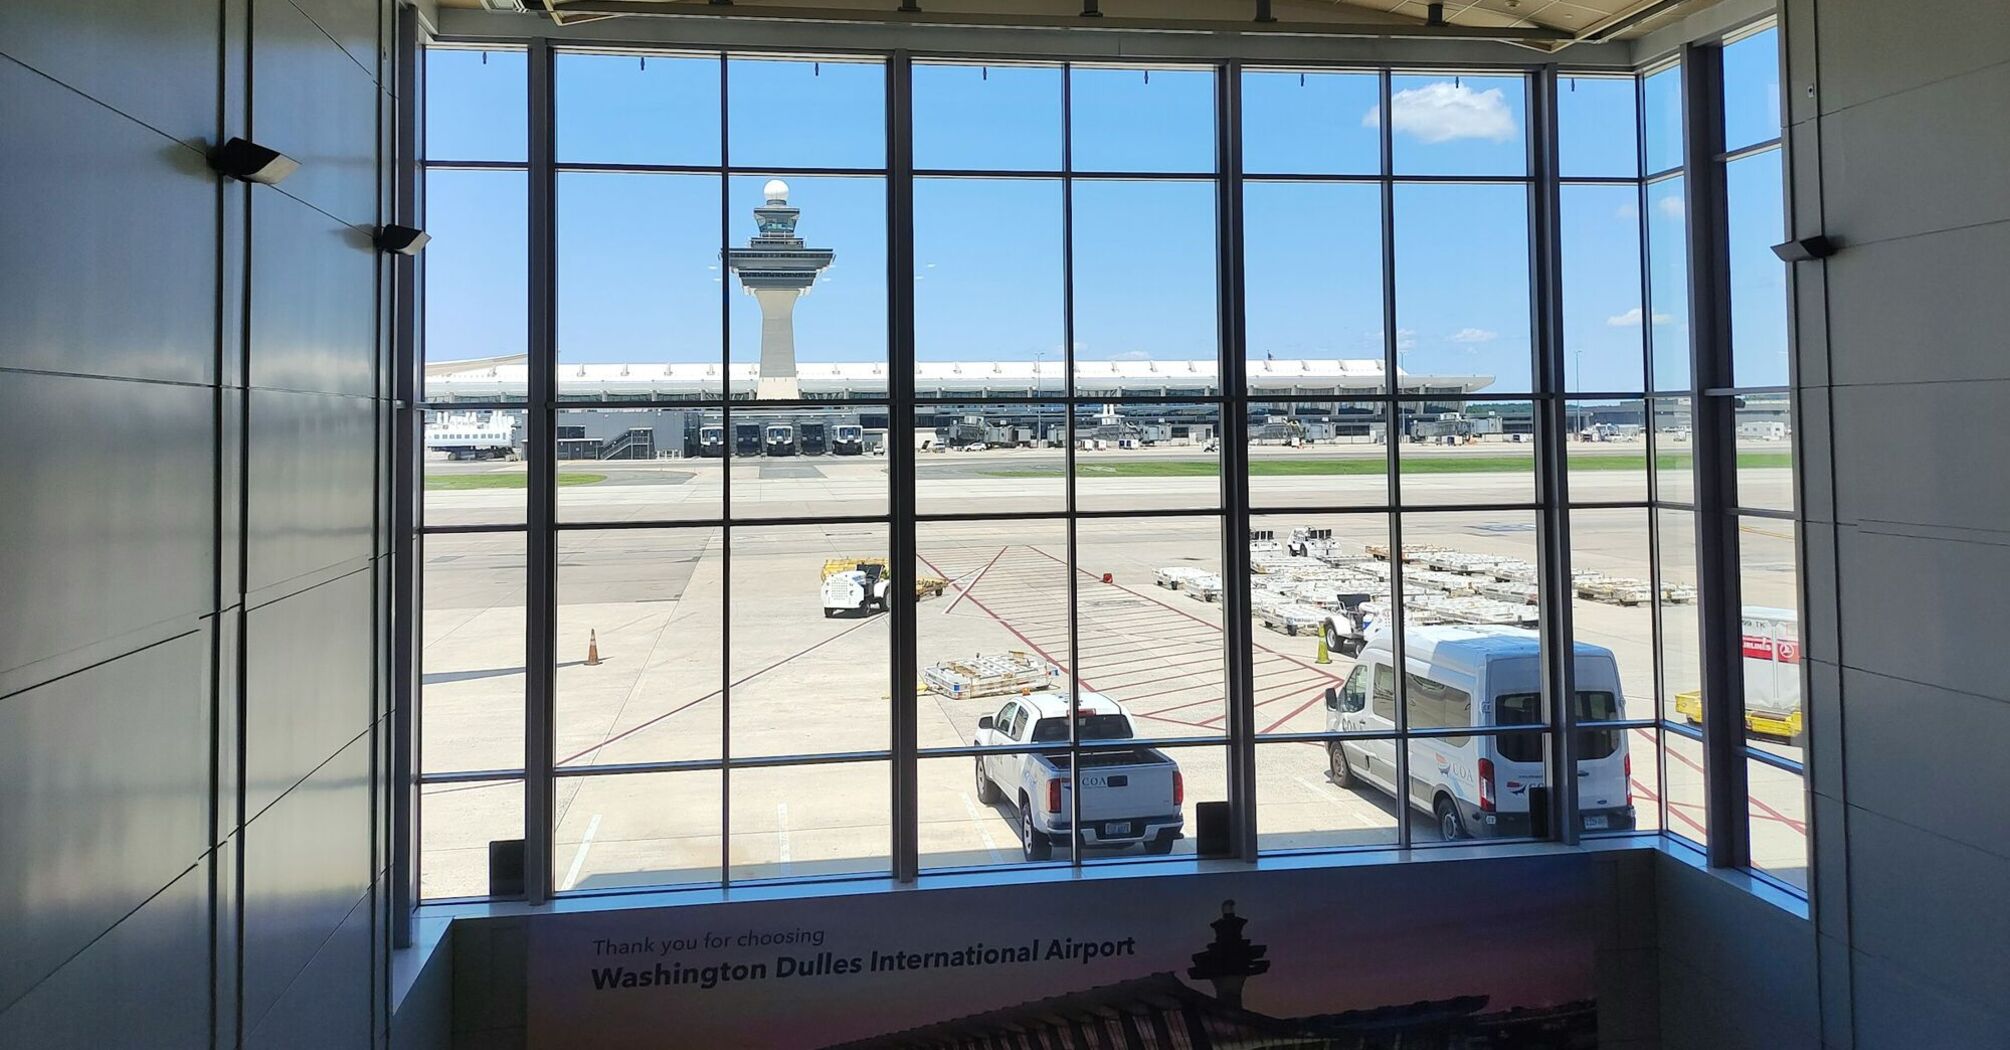 View of Washington Dulles International Airport from inside terminal